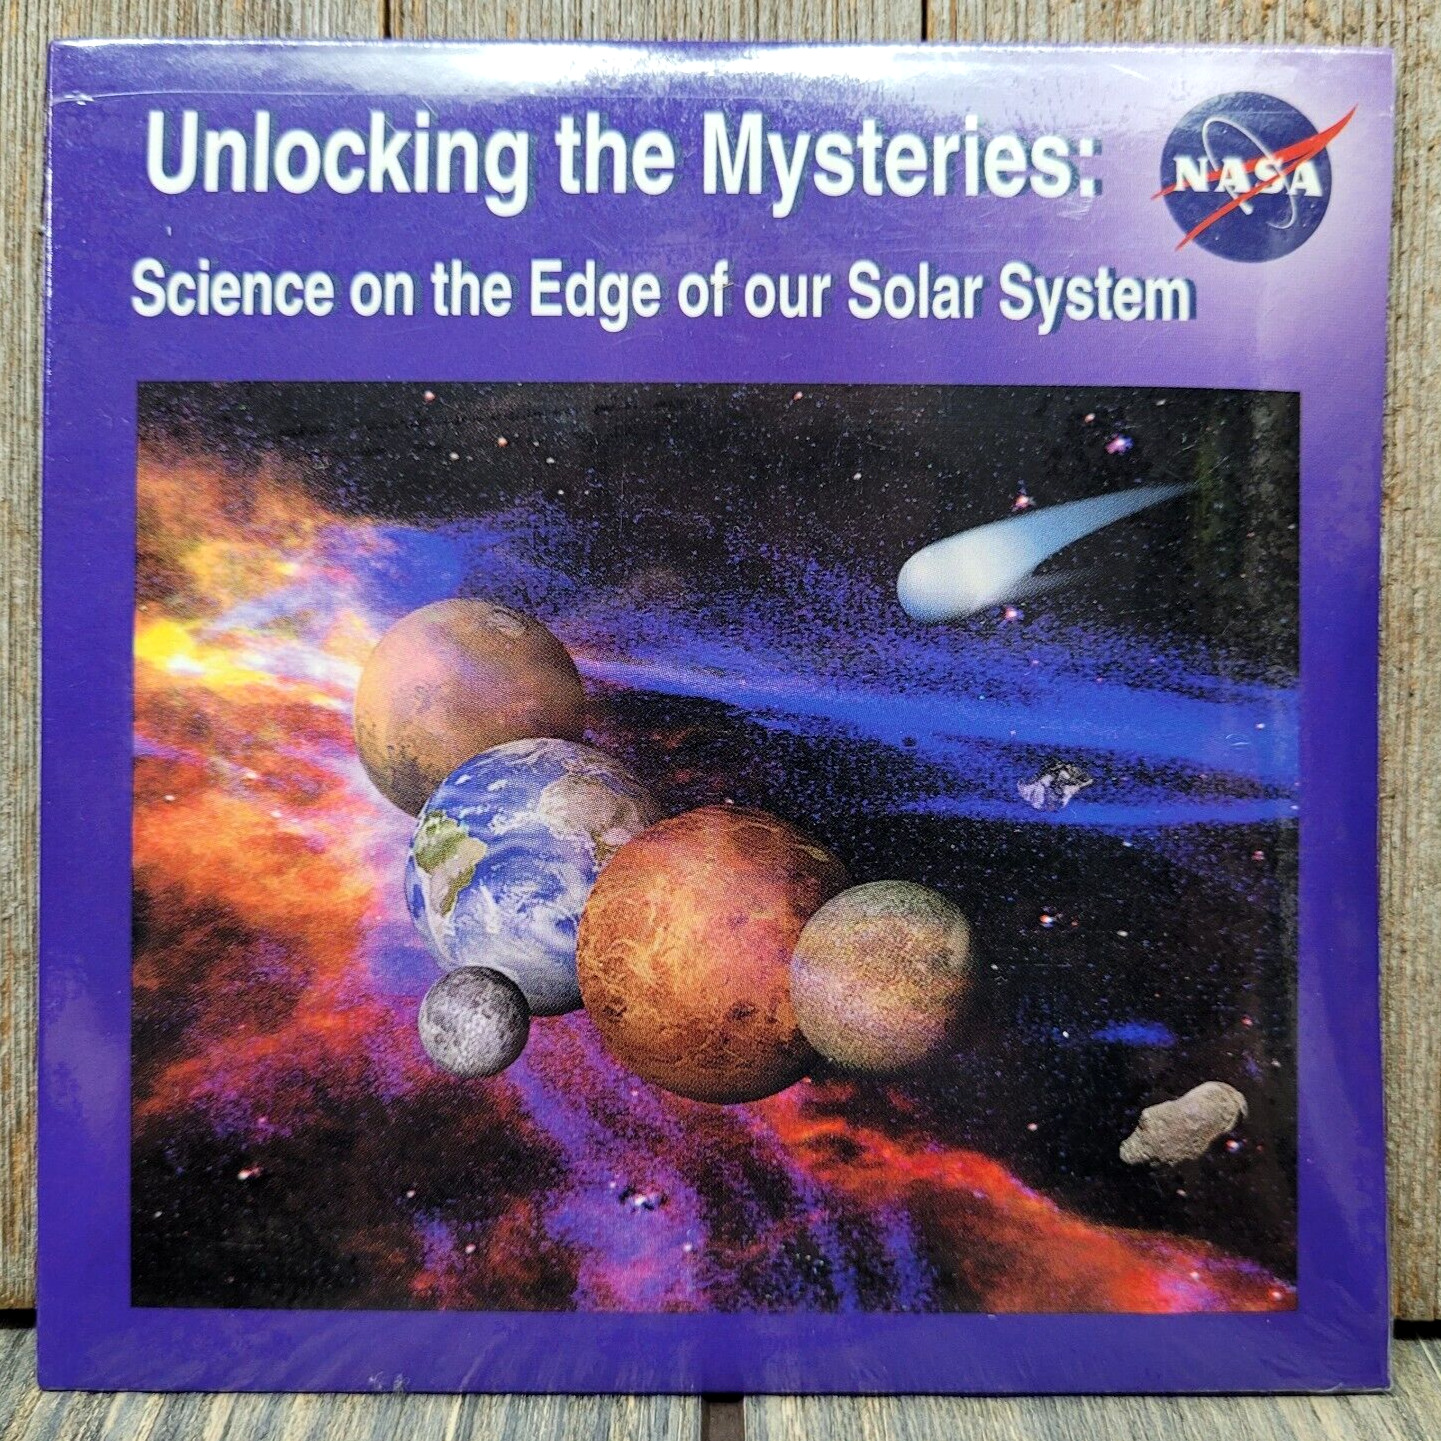 NASA Unlocking the Mysteries: Science on the Edge of our Solar System CD-ROM NEW